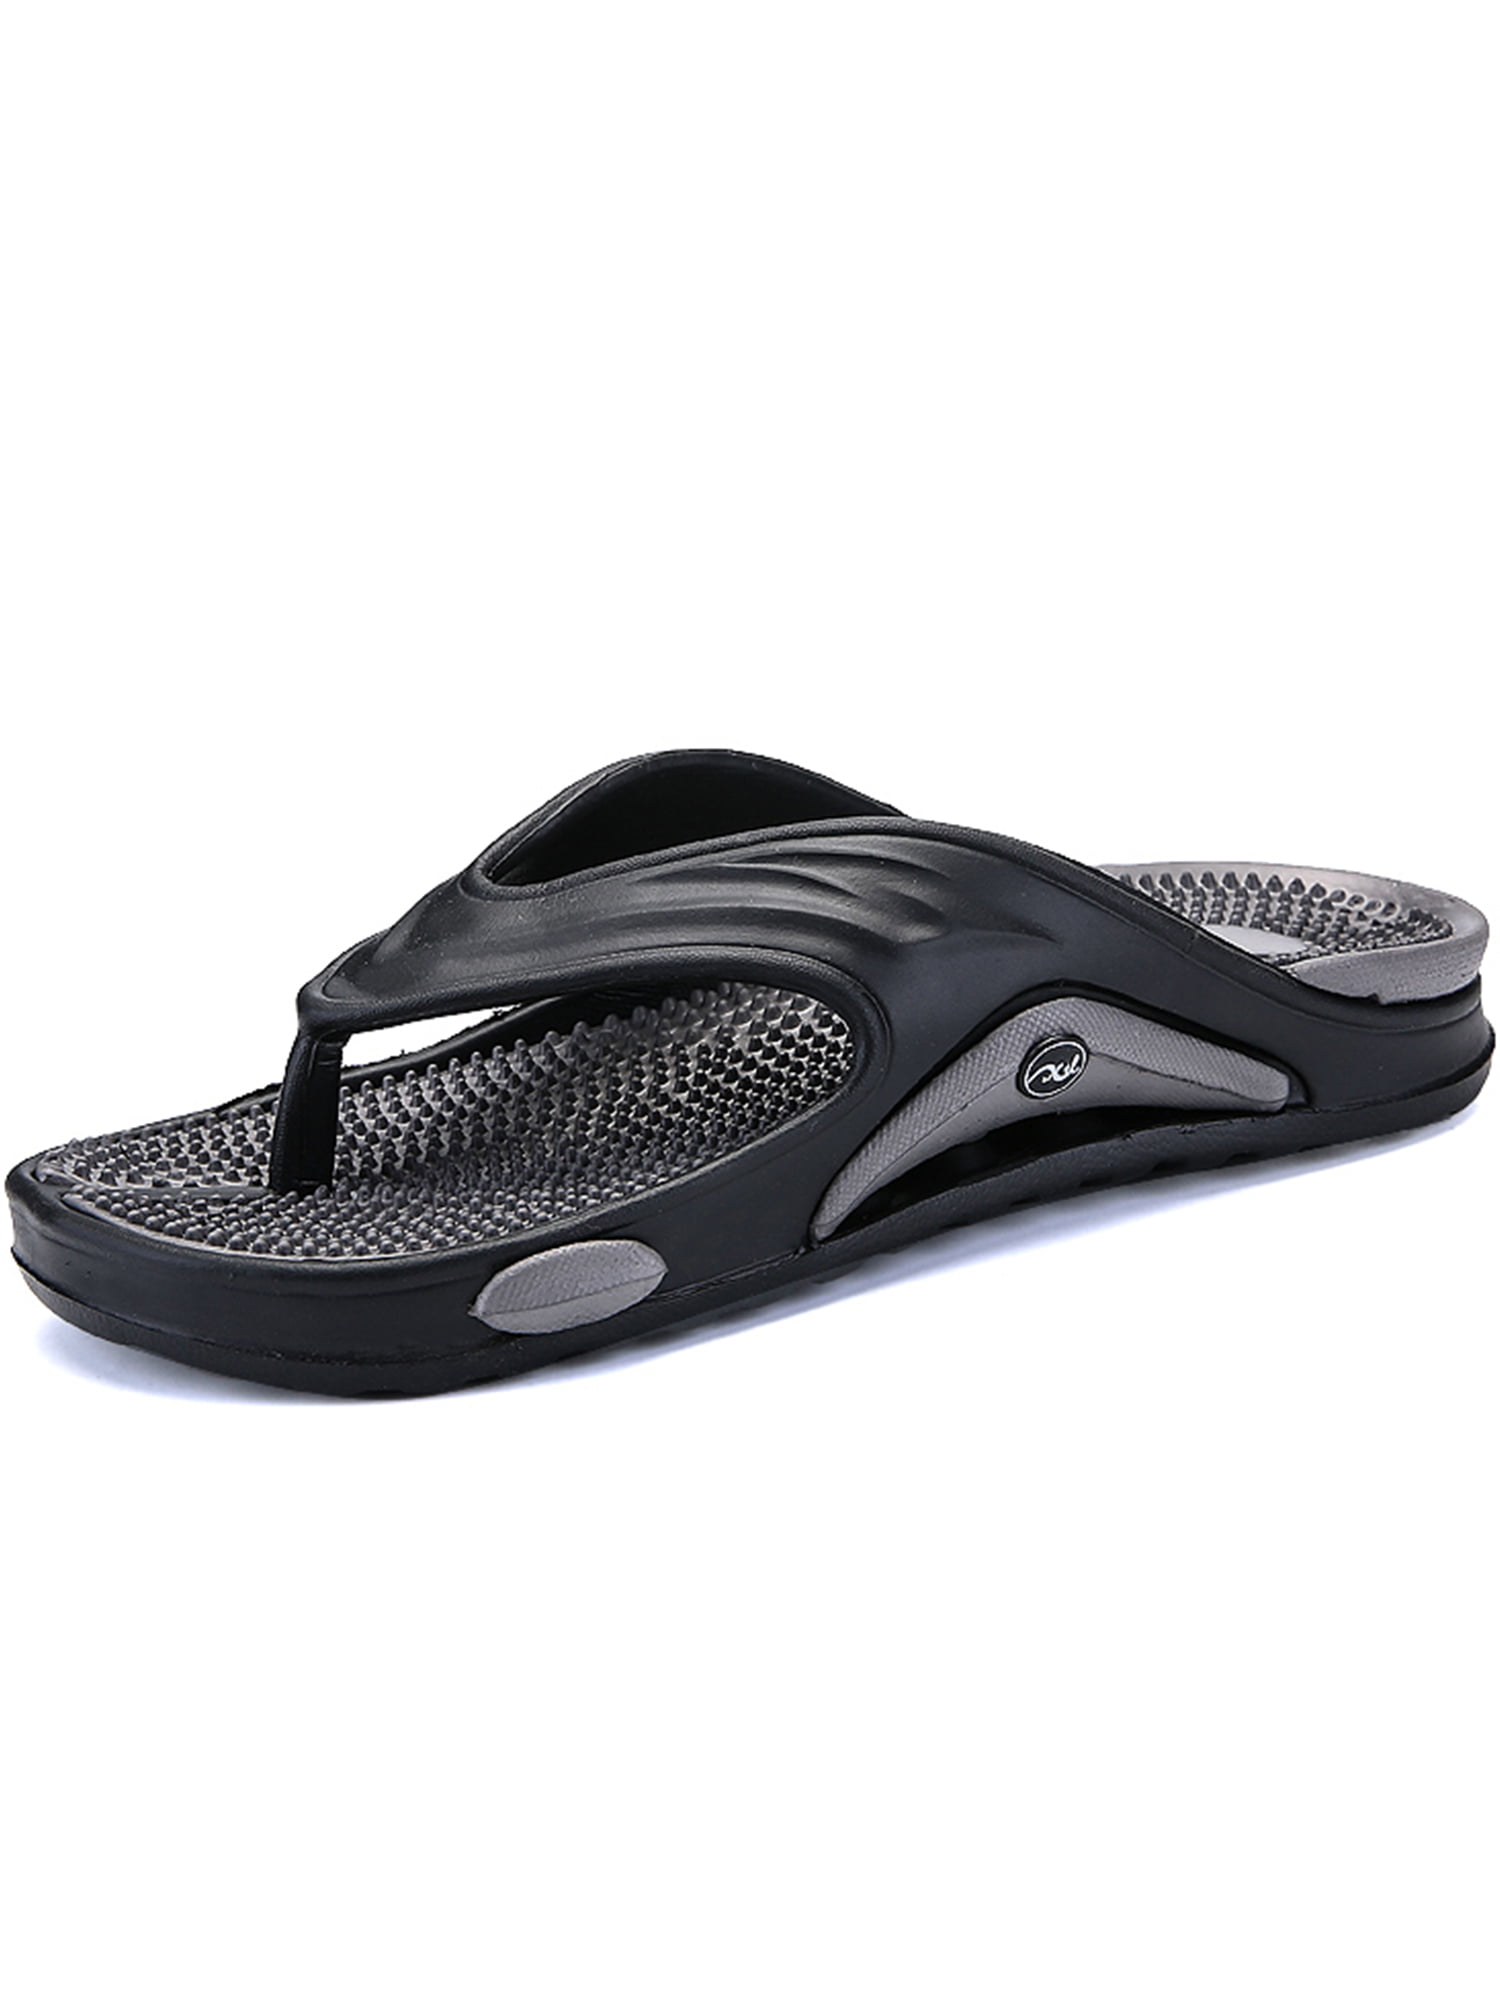 shower shoes with arch support